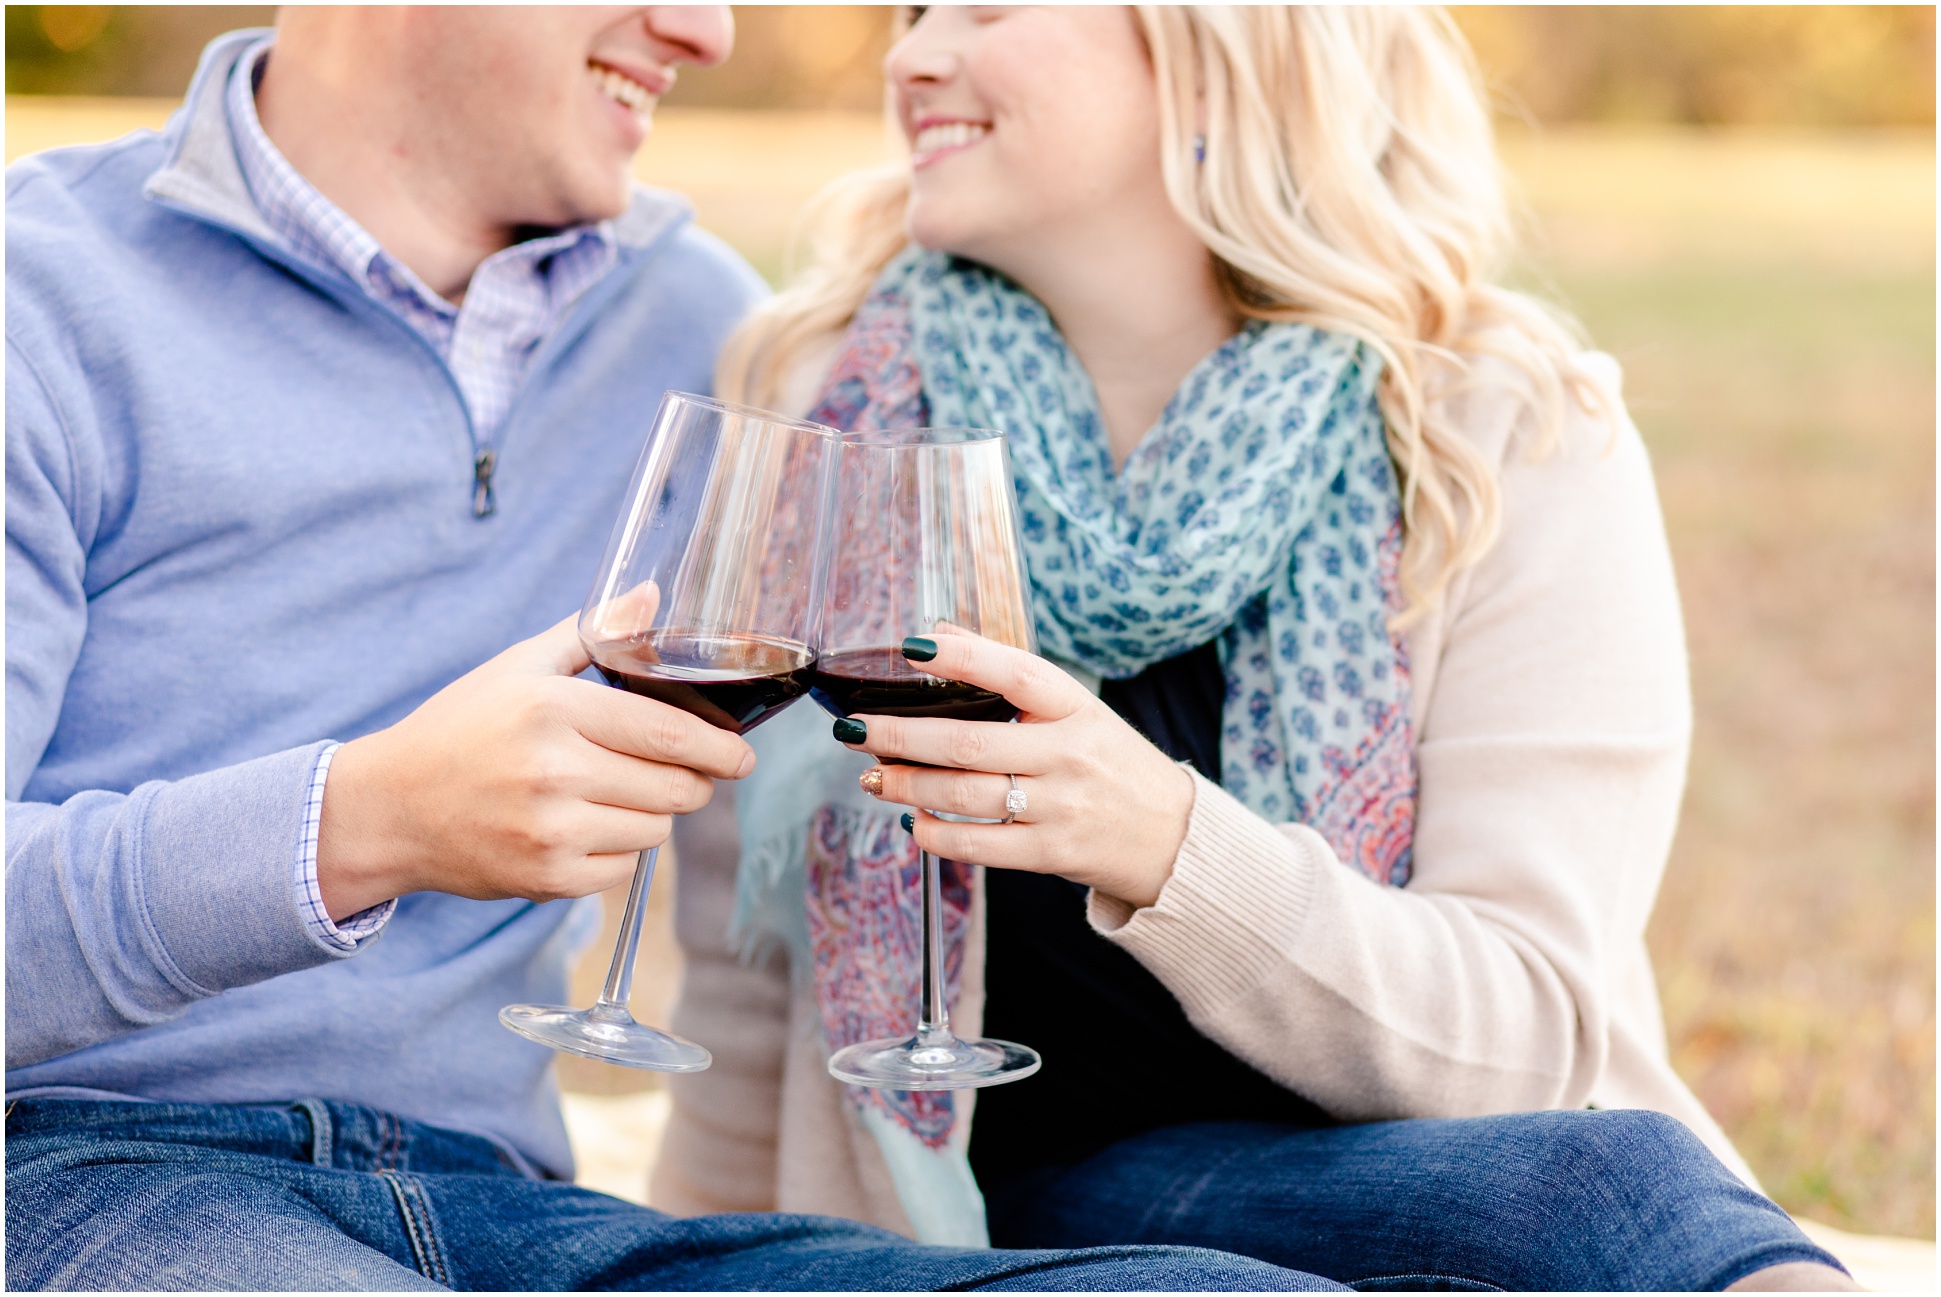 Couple smiling at each other while making a toast with red wine